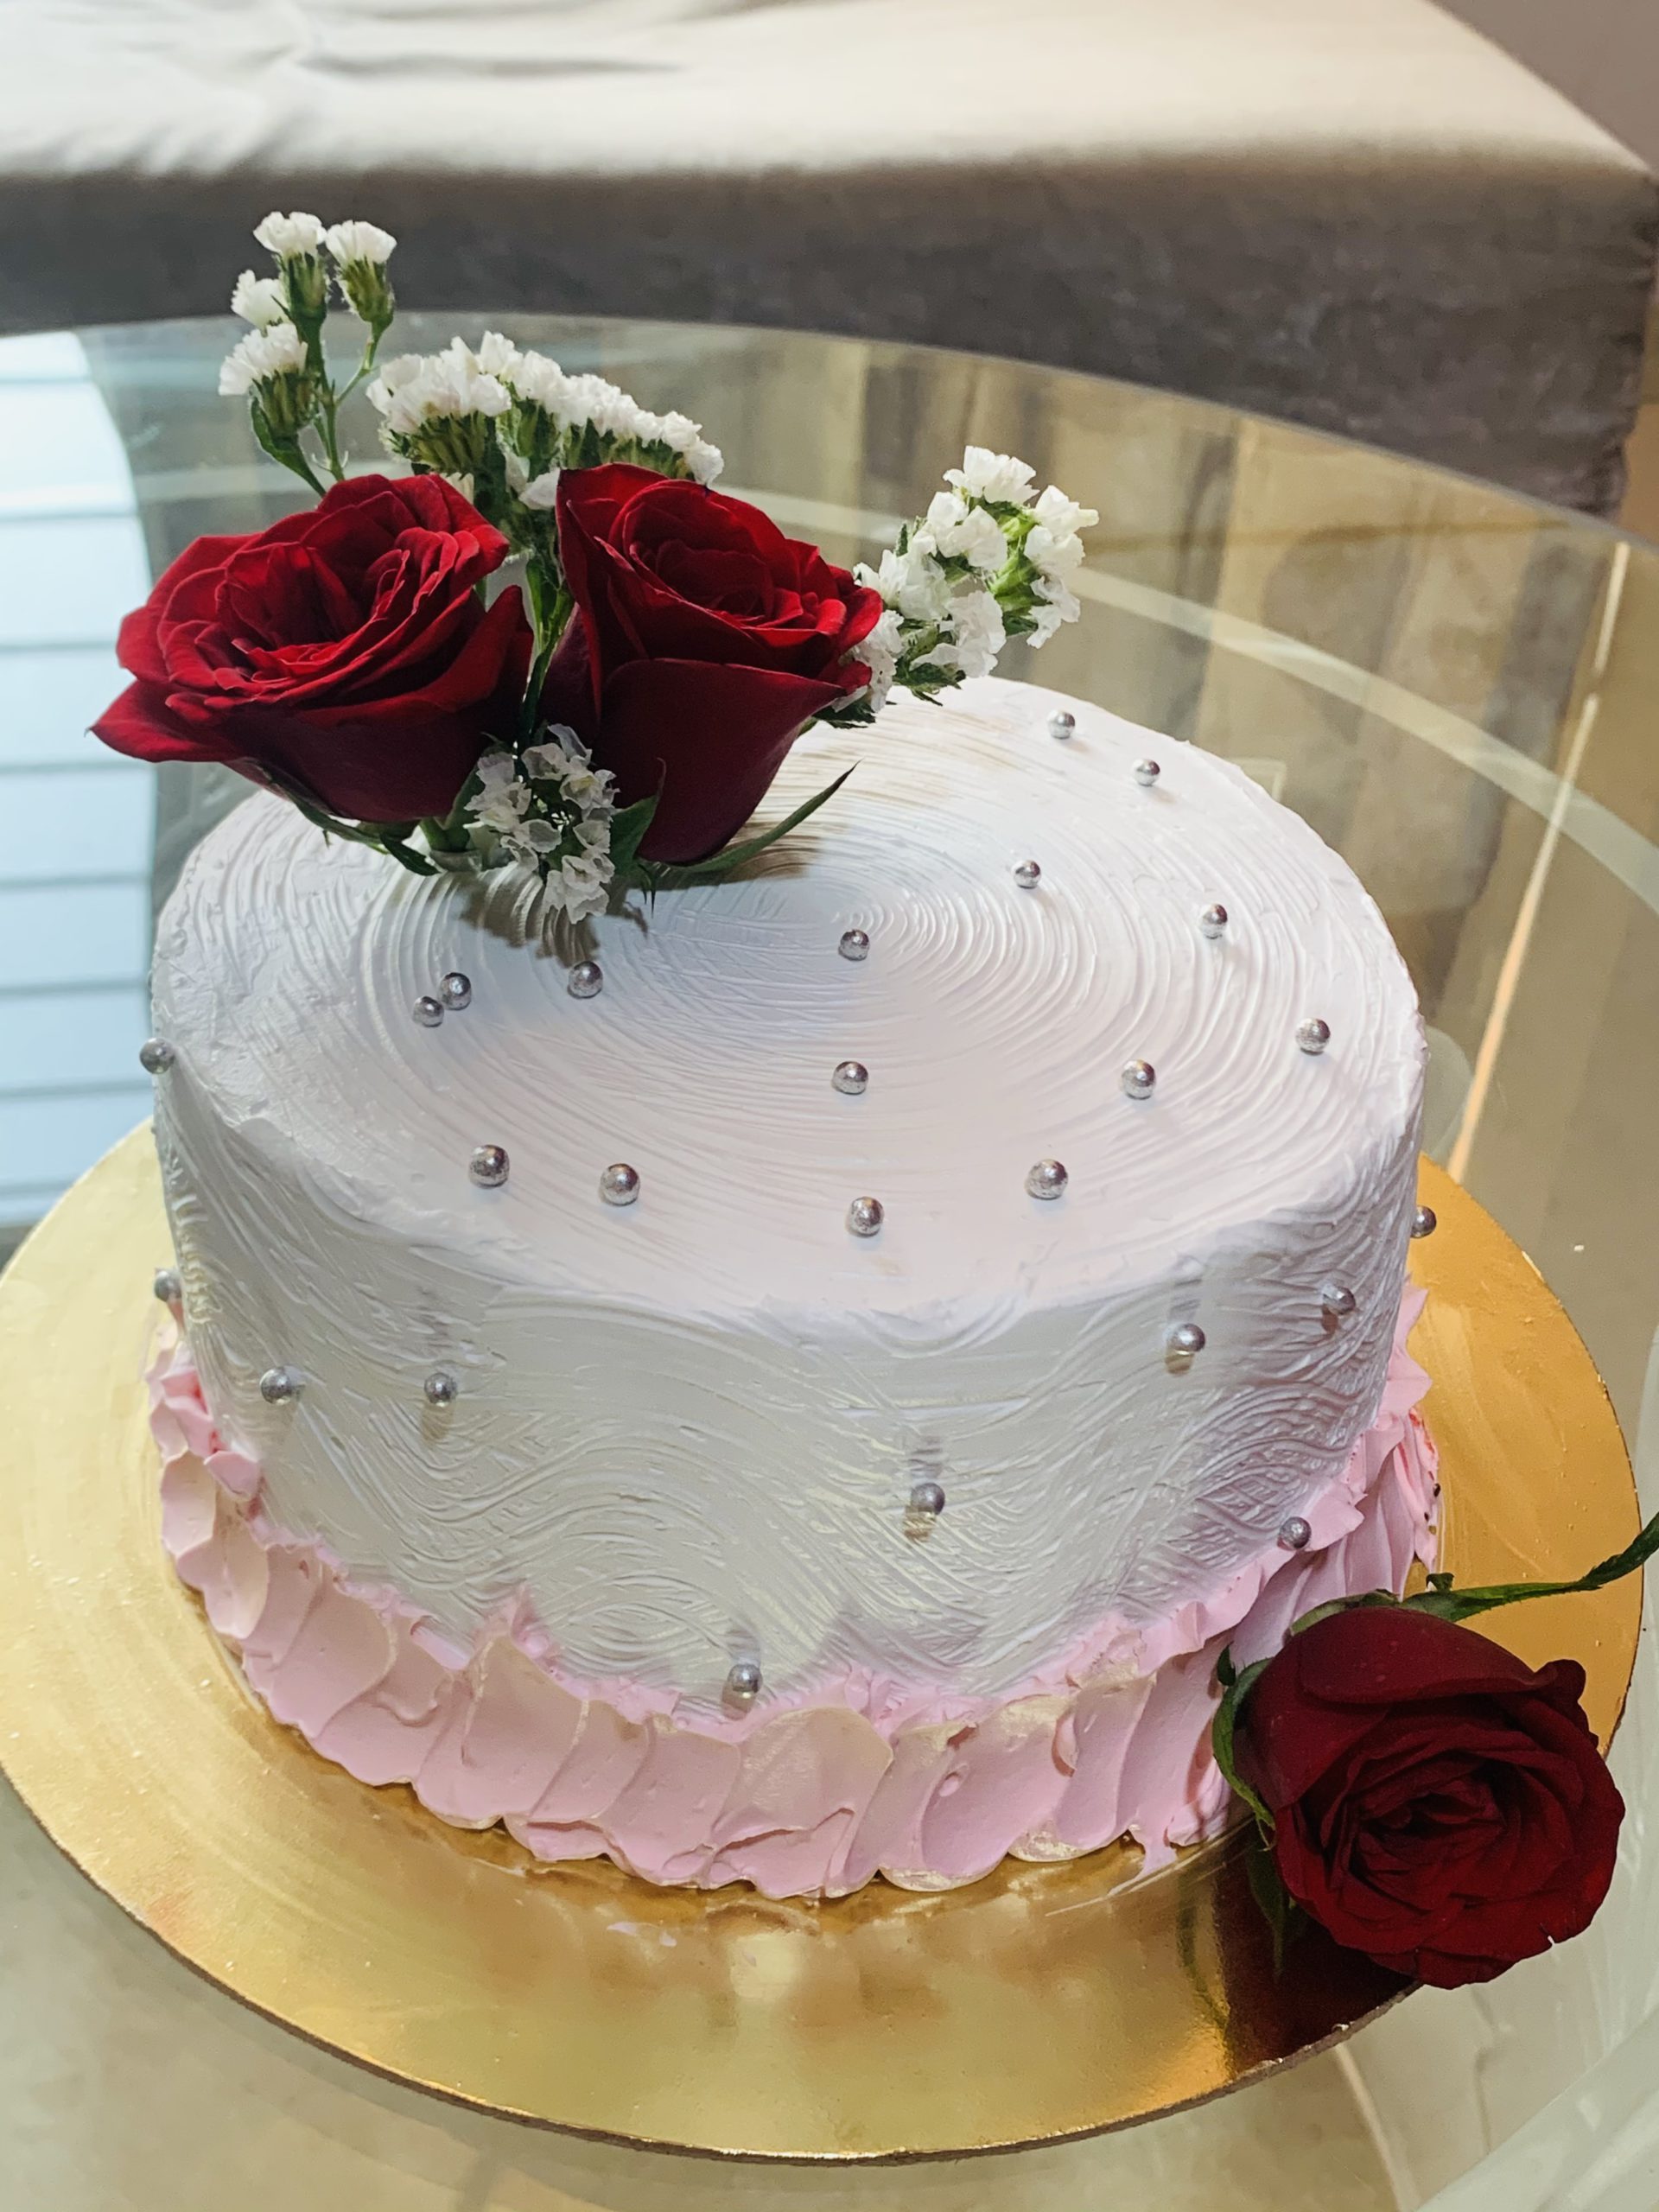 Anniversary Special Cake Designs, Images, Price Near Me